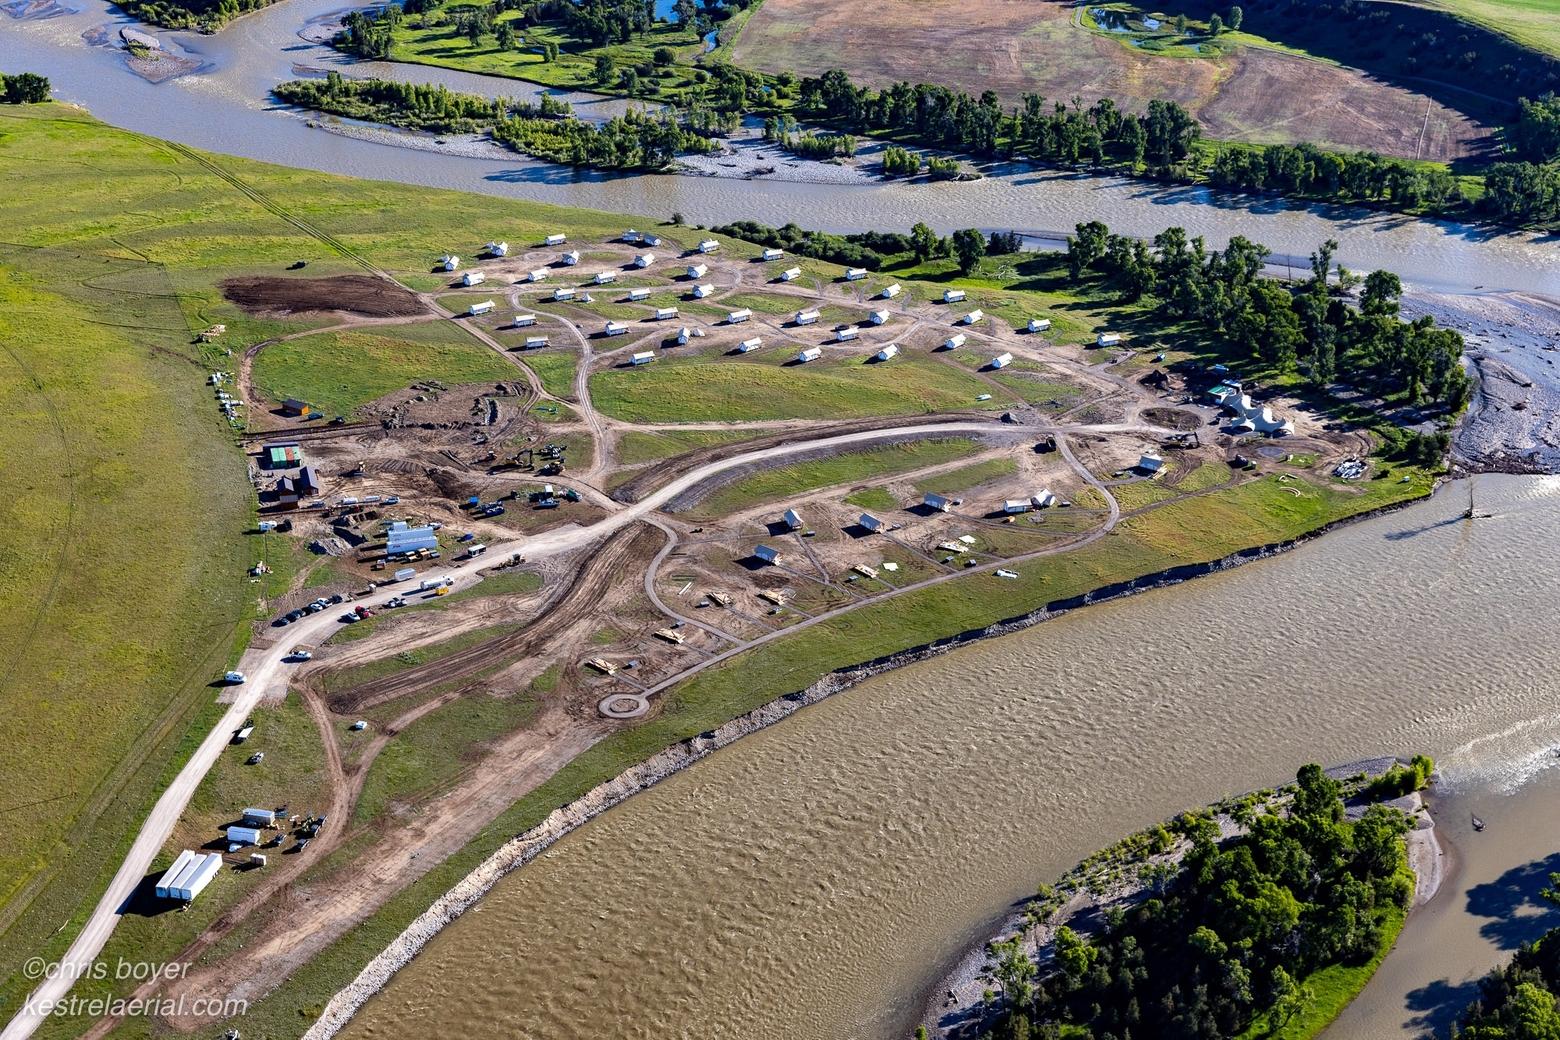 When residents of Livingston, Montana saw this image for the first time, they were stunned. A new multi-unit glampground and its accompanying infrastructure is now saddled near the banks of the Yellowstone River in Paradise Valley, made vivid in this photograph by Christopher Boyer of Kestrel Aerial.  The glampground is a symbol of the rapidly expanding natural amenity economy whose strongest advocates have been traditional conservation organizations. Many of those organizations have been absent from county planning and zoning discussions so important in bringing scrutiny to projects like this.